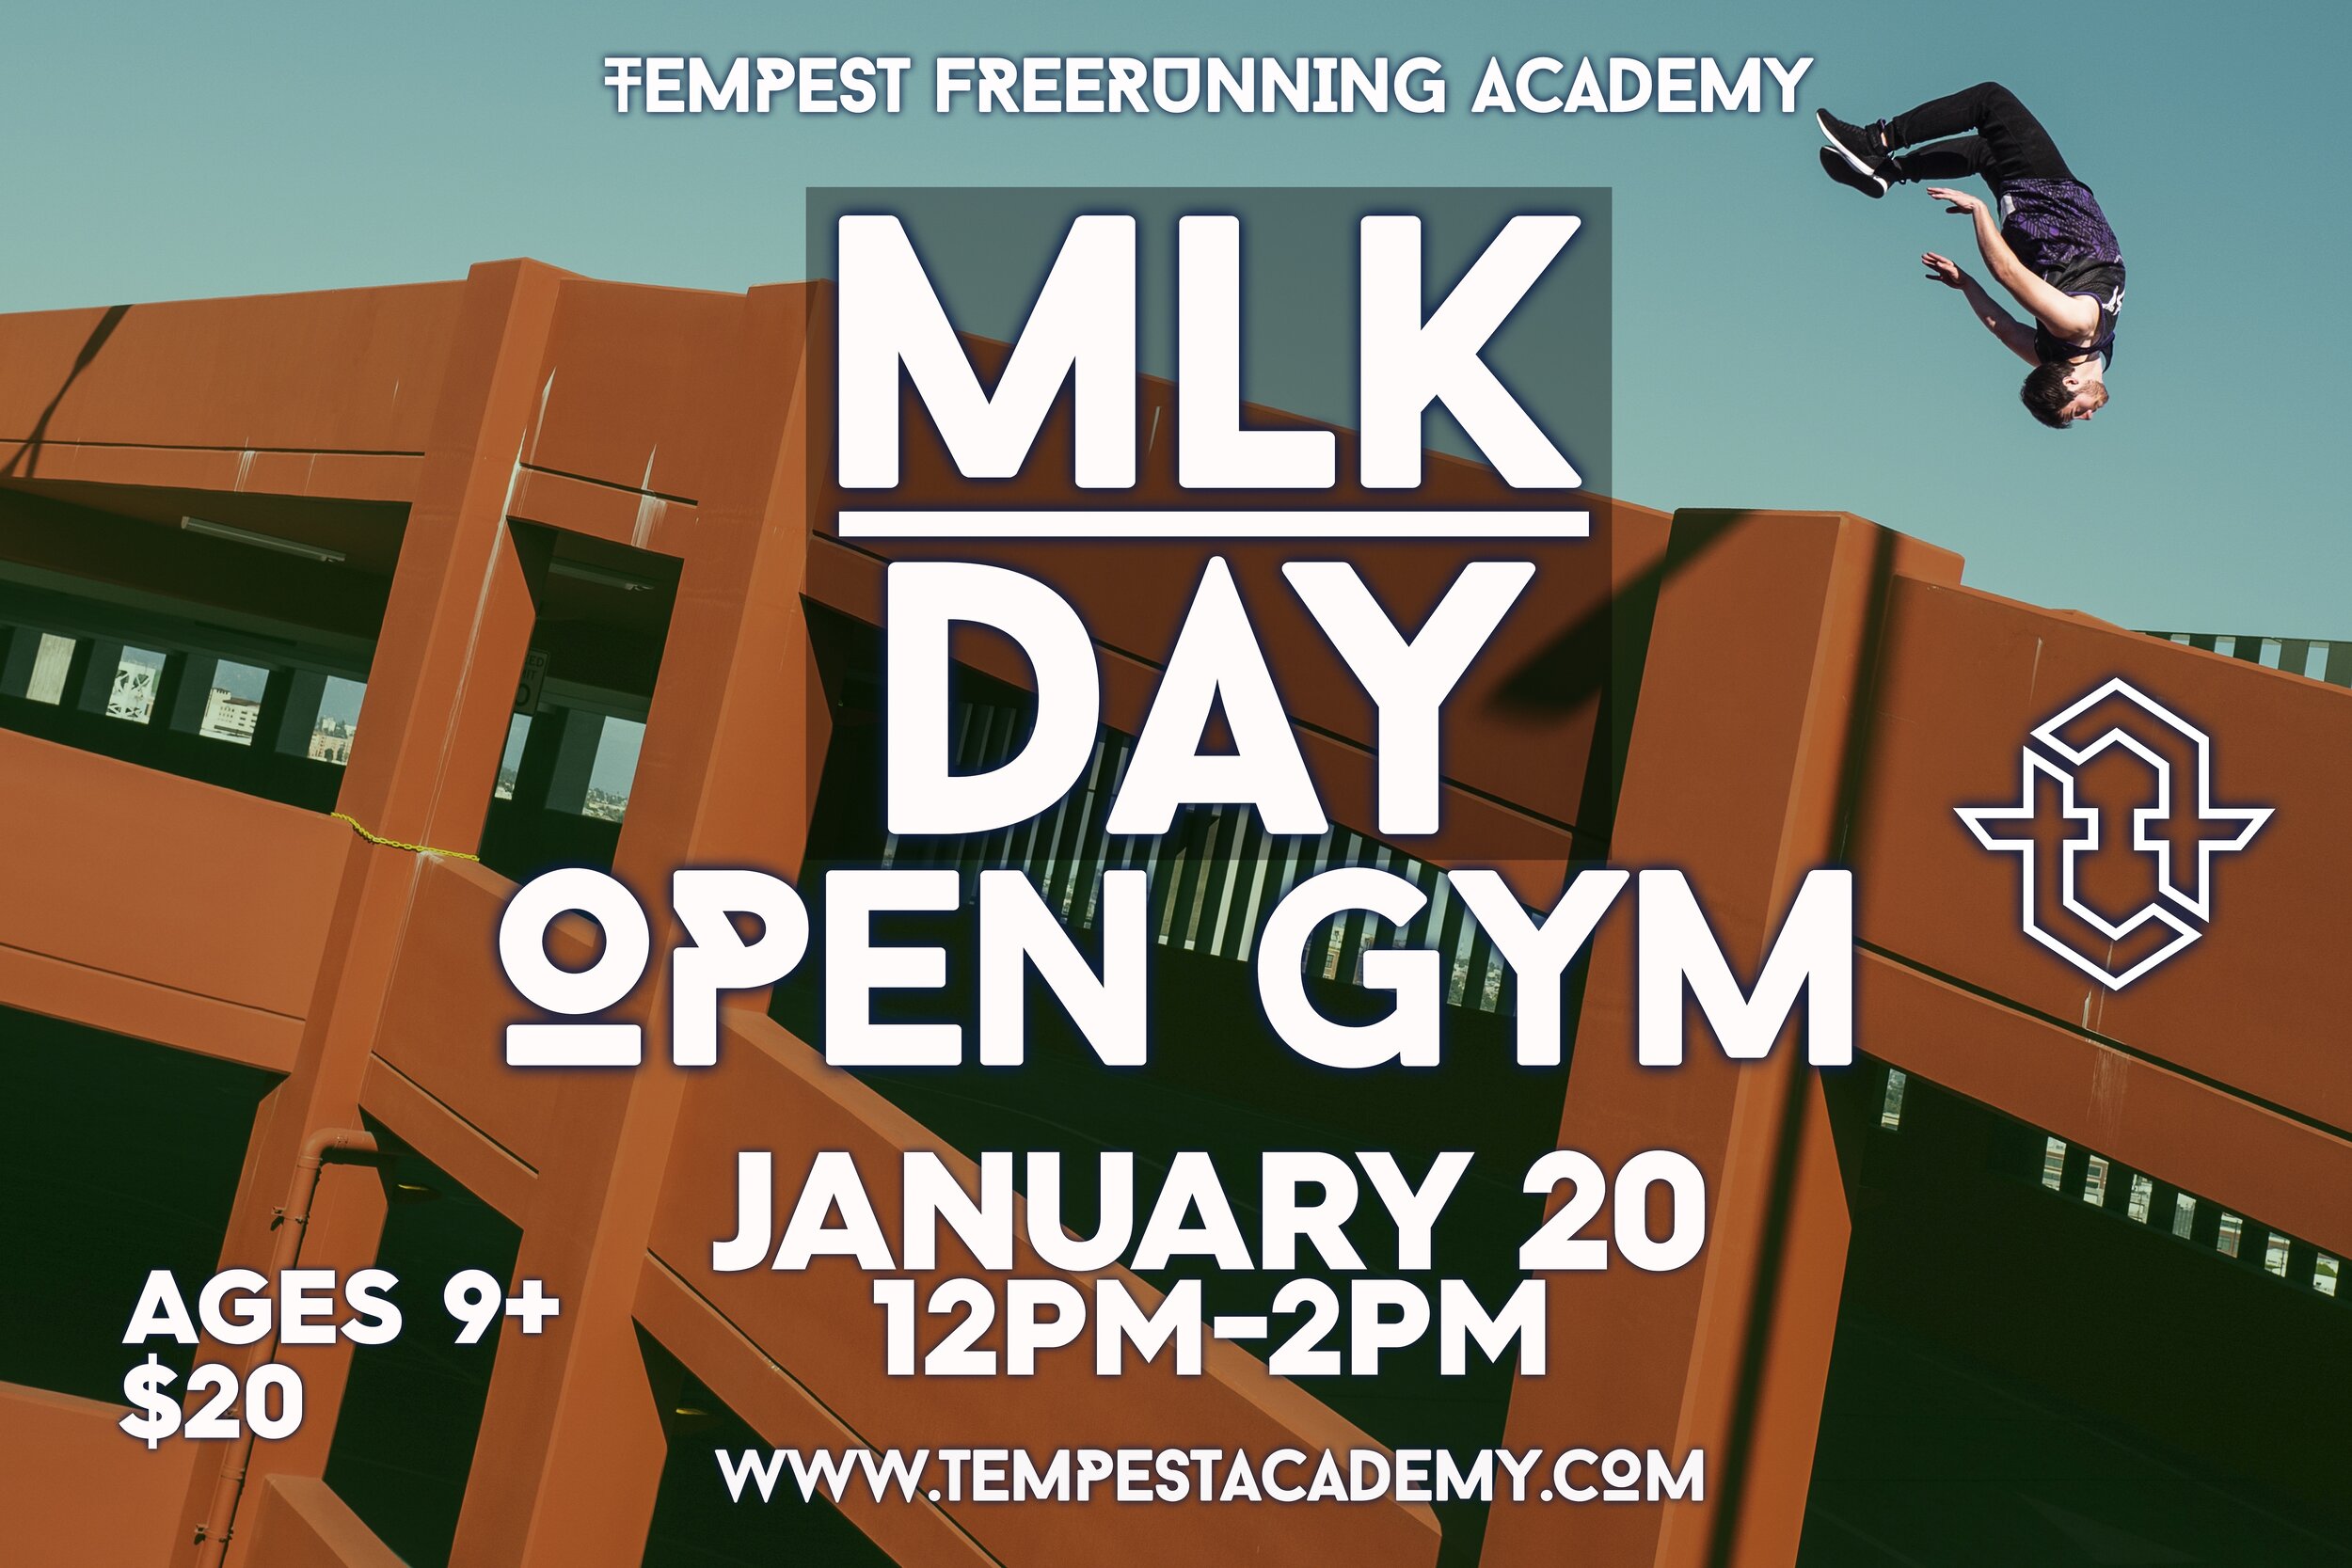 30 Minute Are Gyms Open On Mlk Day for Weight Loss